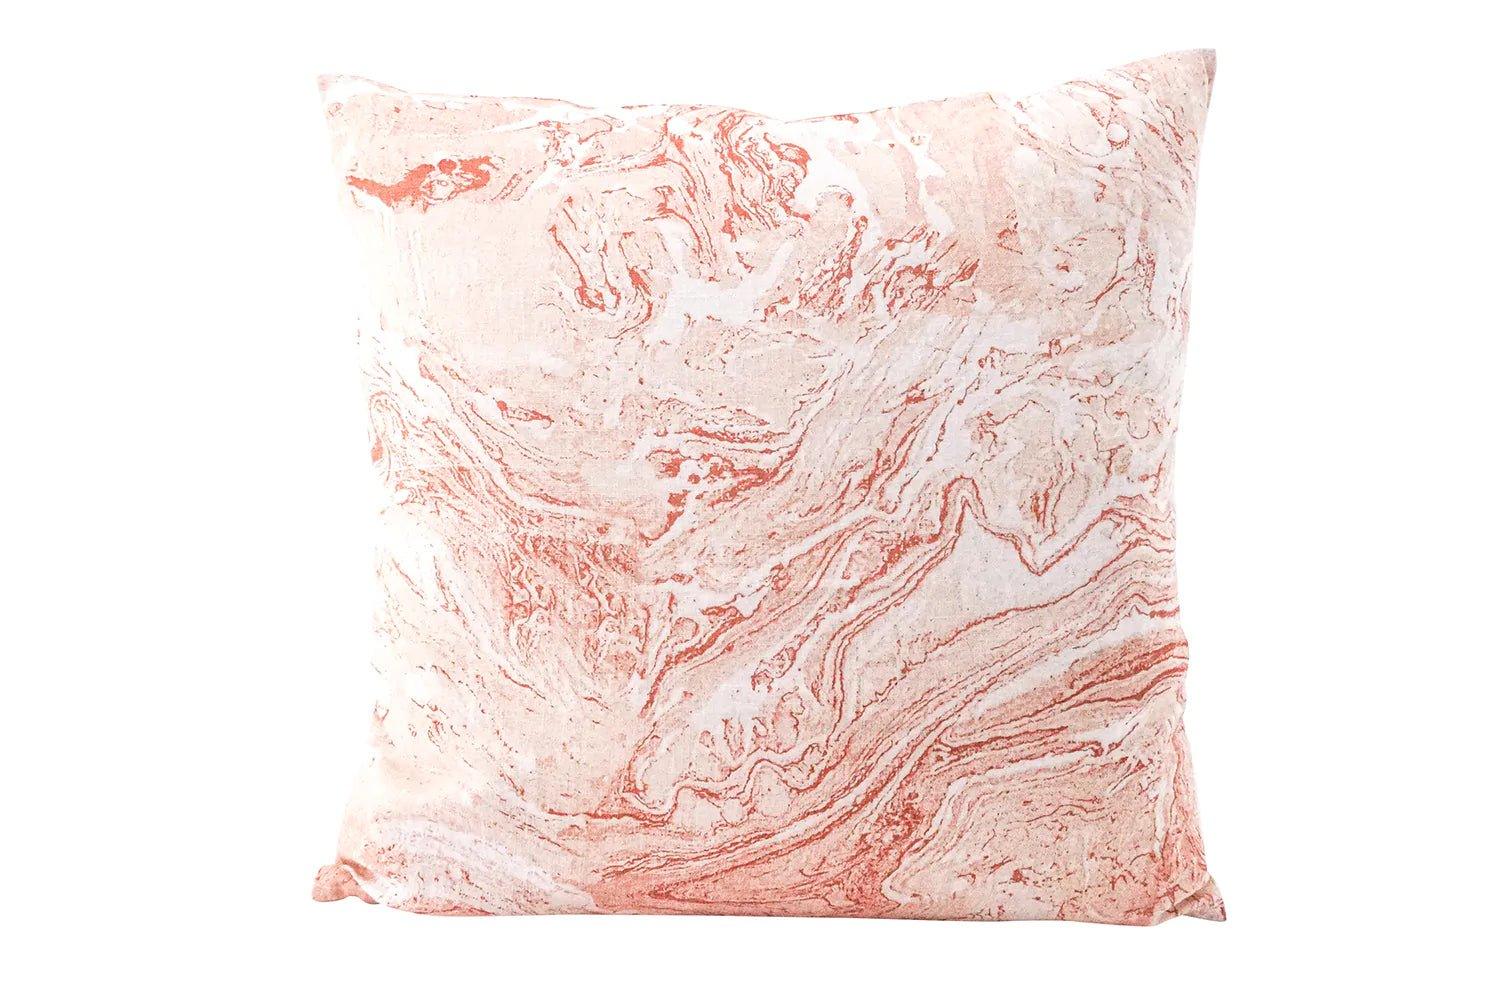 Linen Pillow Covers in Handcrafted Marble Print - Nature Home Decor